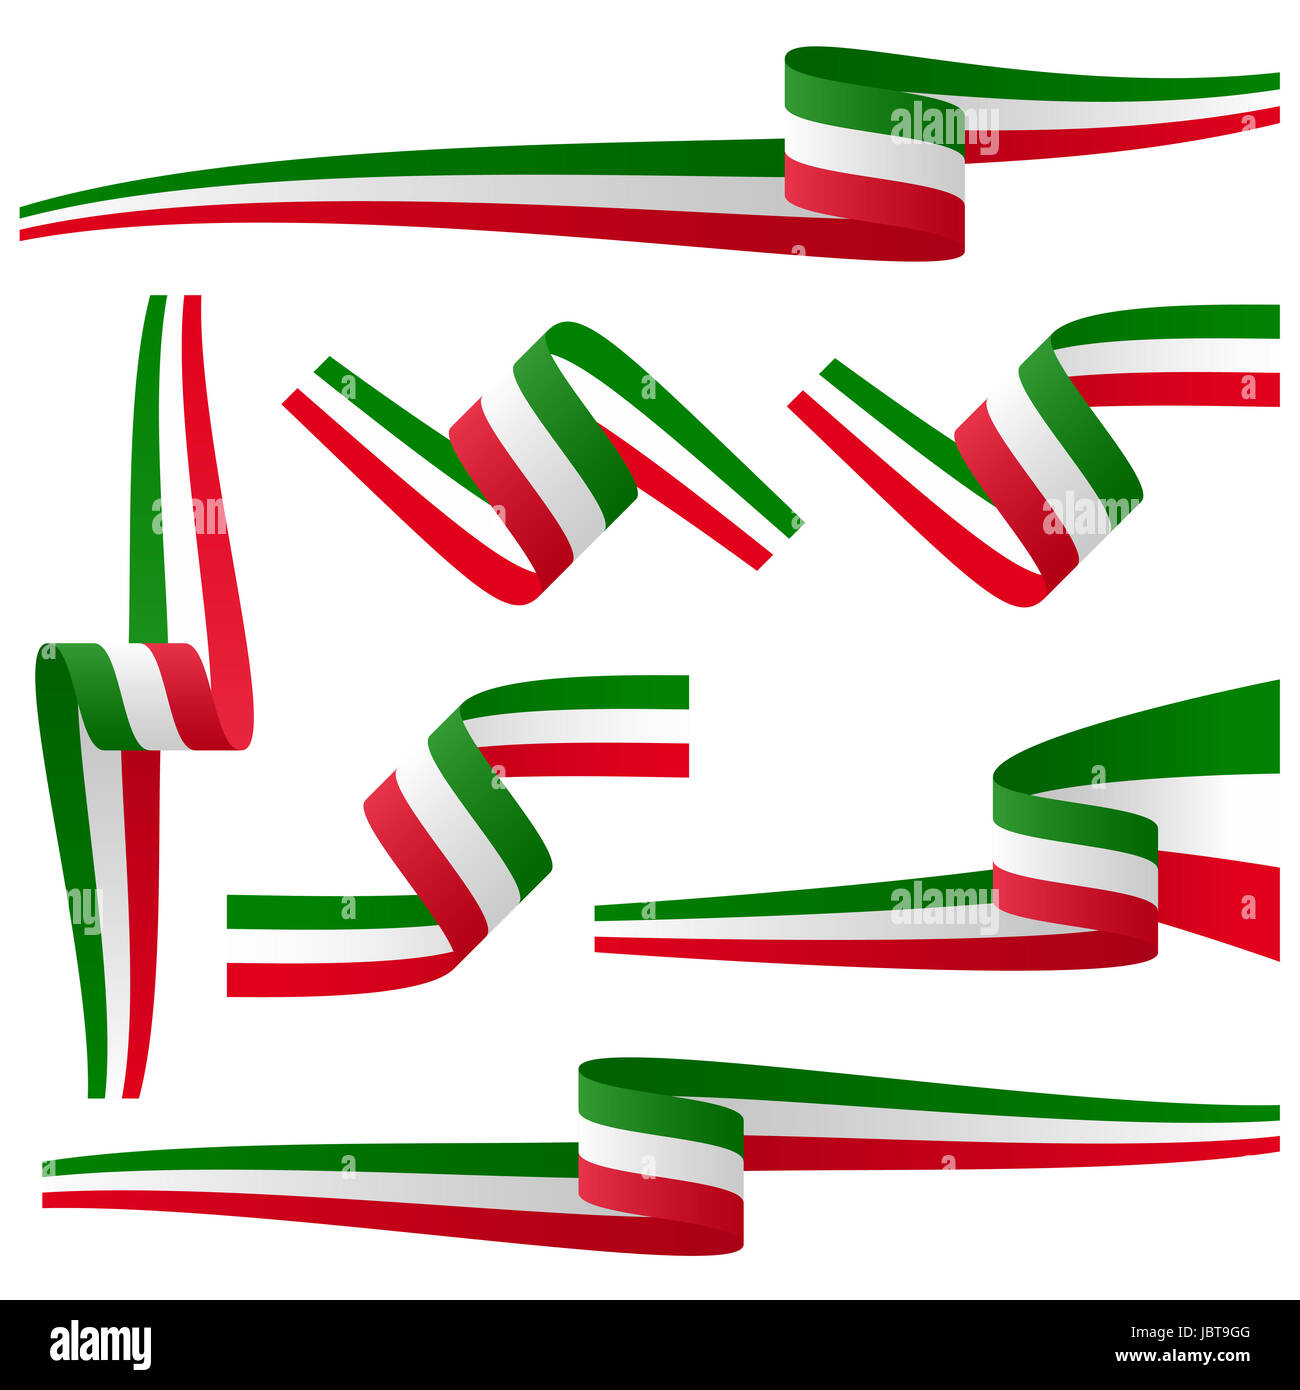 Fahne italien flag italy Cut Out Stock Images & Pictures - Alamy